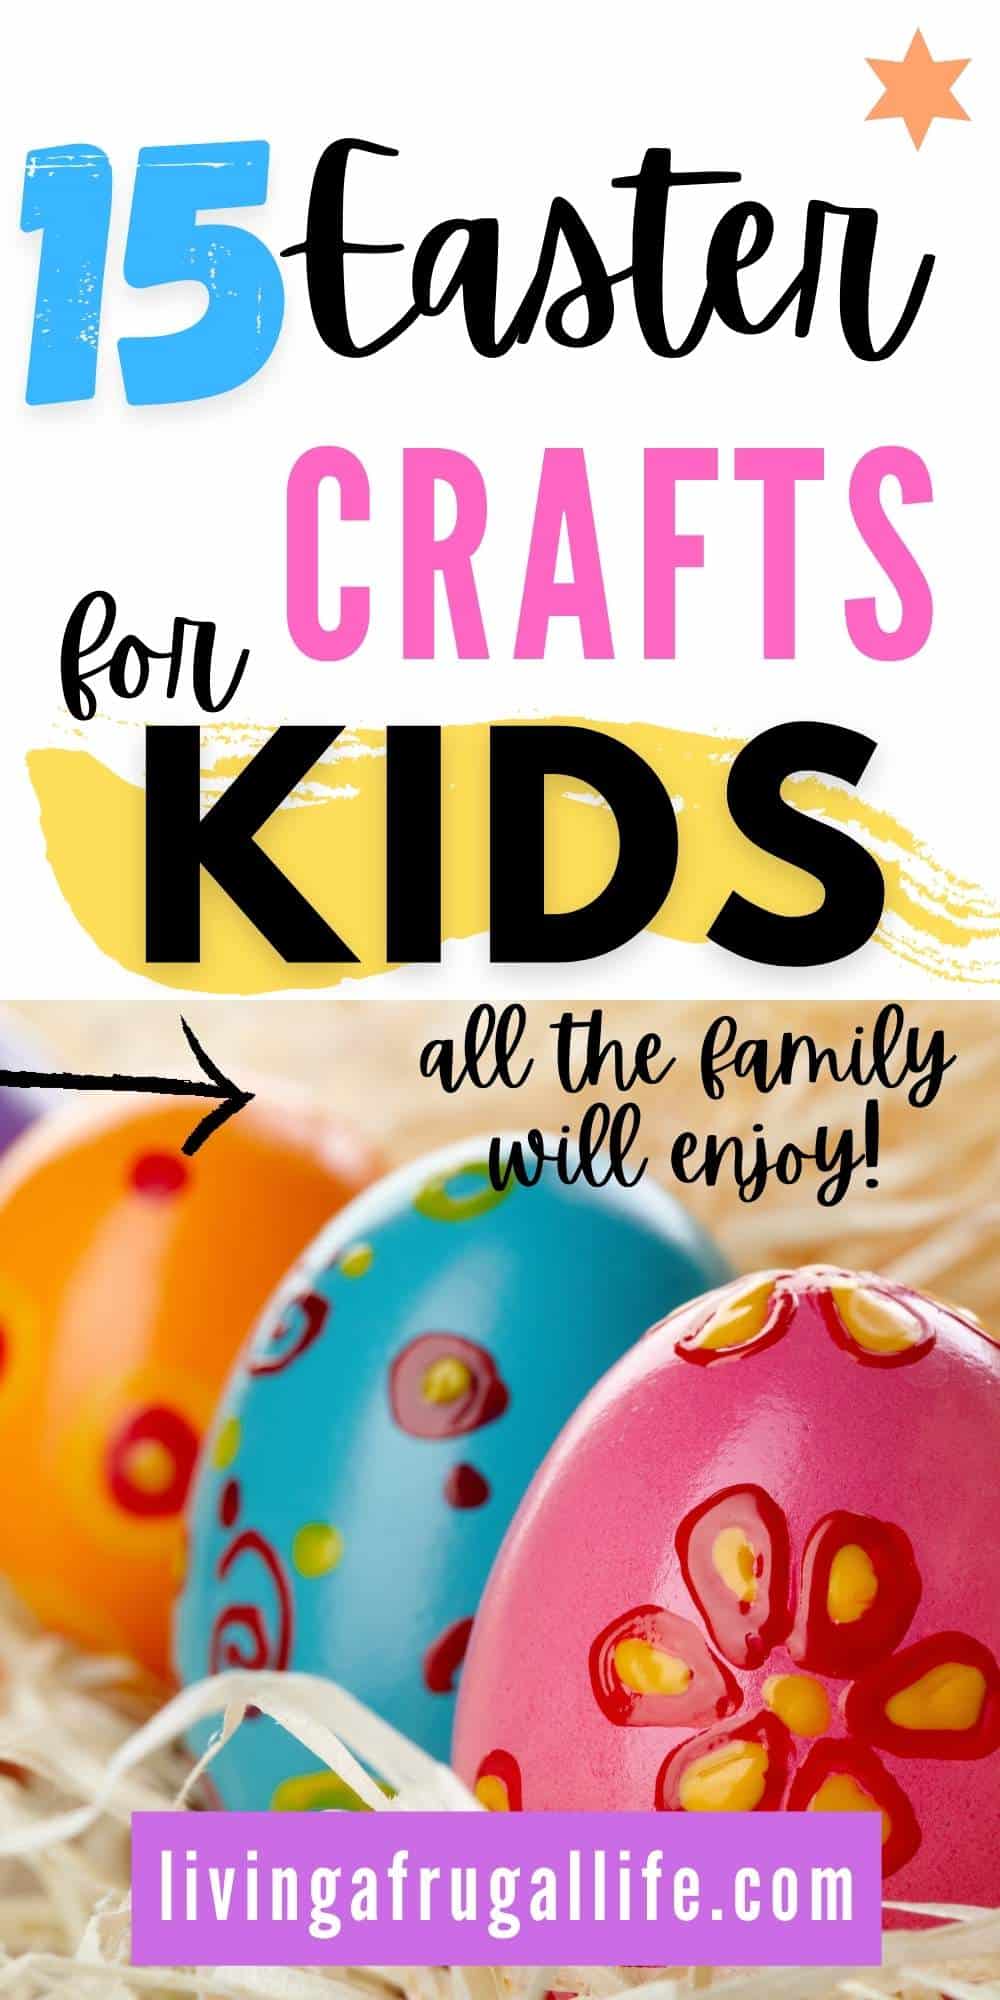 Easter Crafts and Activities